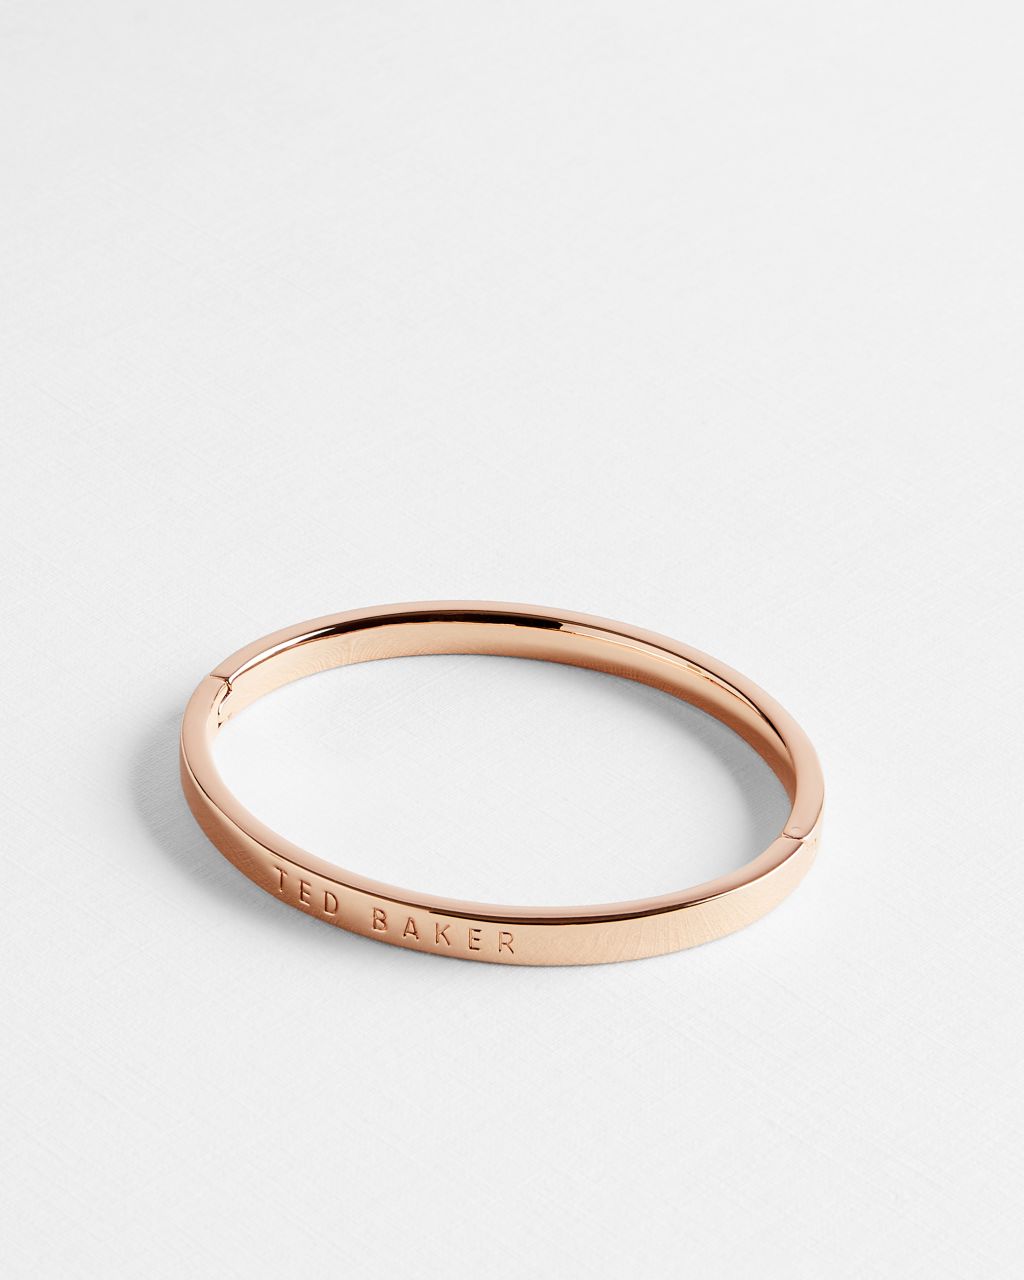 Ted Baker Women's Hinged Bangle in Rosegold Color, Clemina